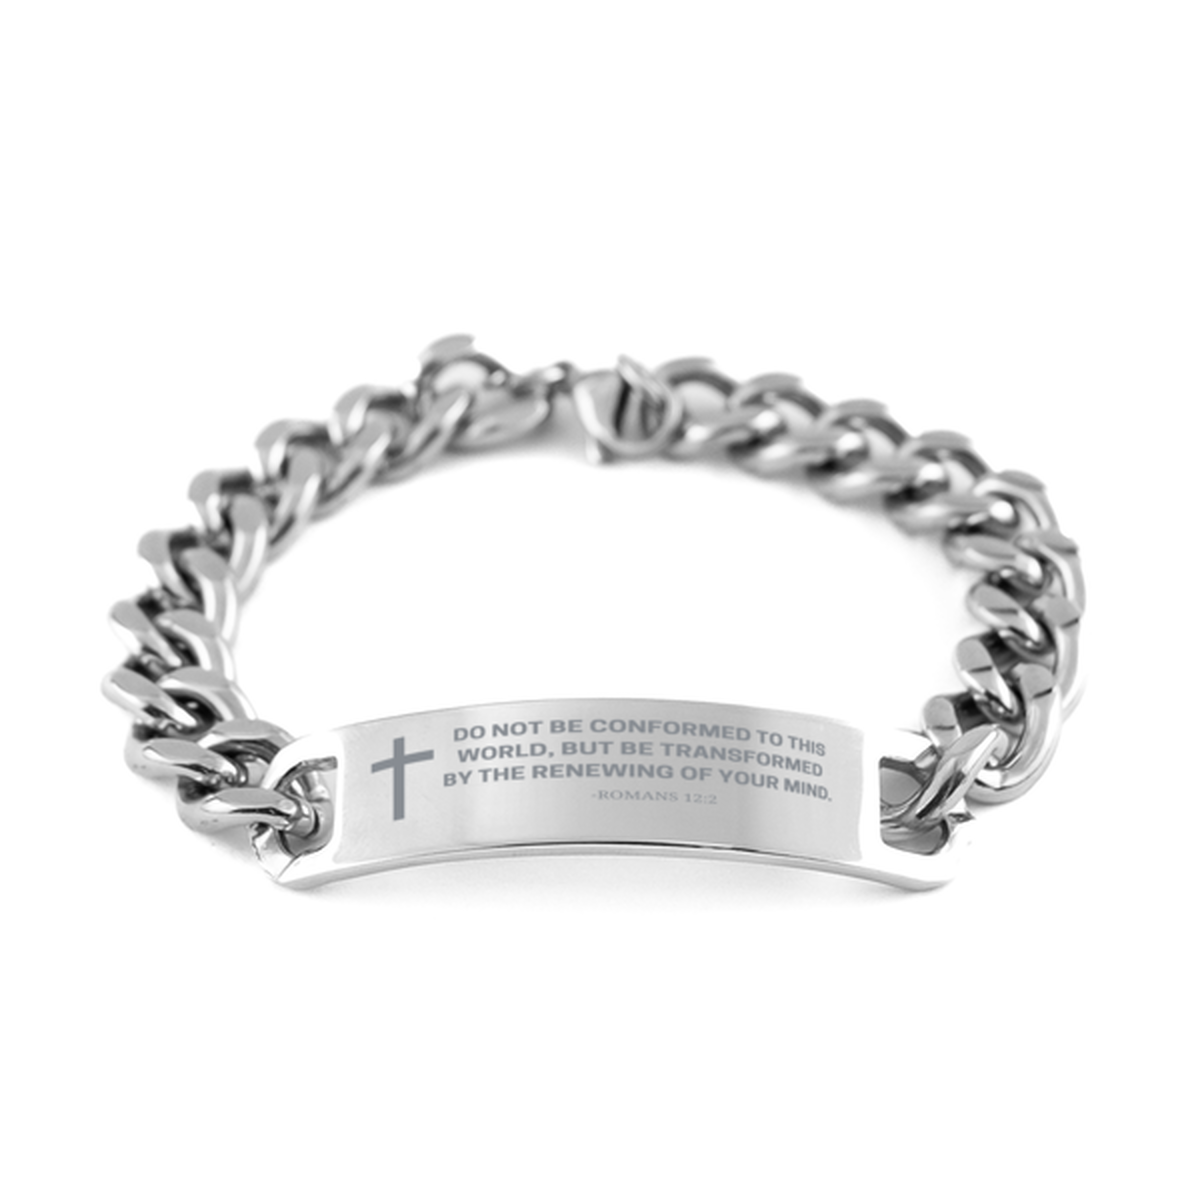 Baptism Gifts For Teenage Boys Girls, Christian Bible Verse Cuban Chain Bracelet, Do not be conformed to this world, Catholic Confirmation Gifts for Son, Godson, Grandson, Nephew